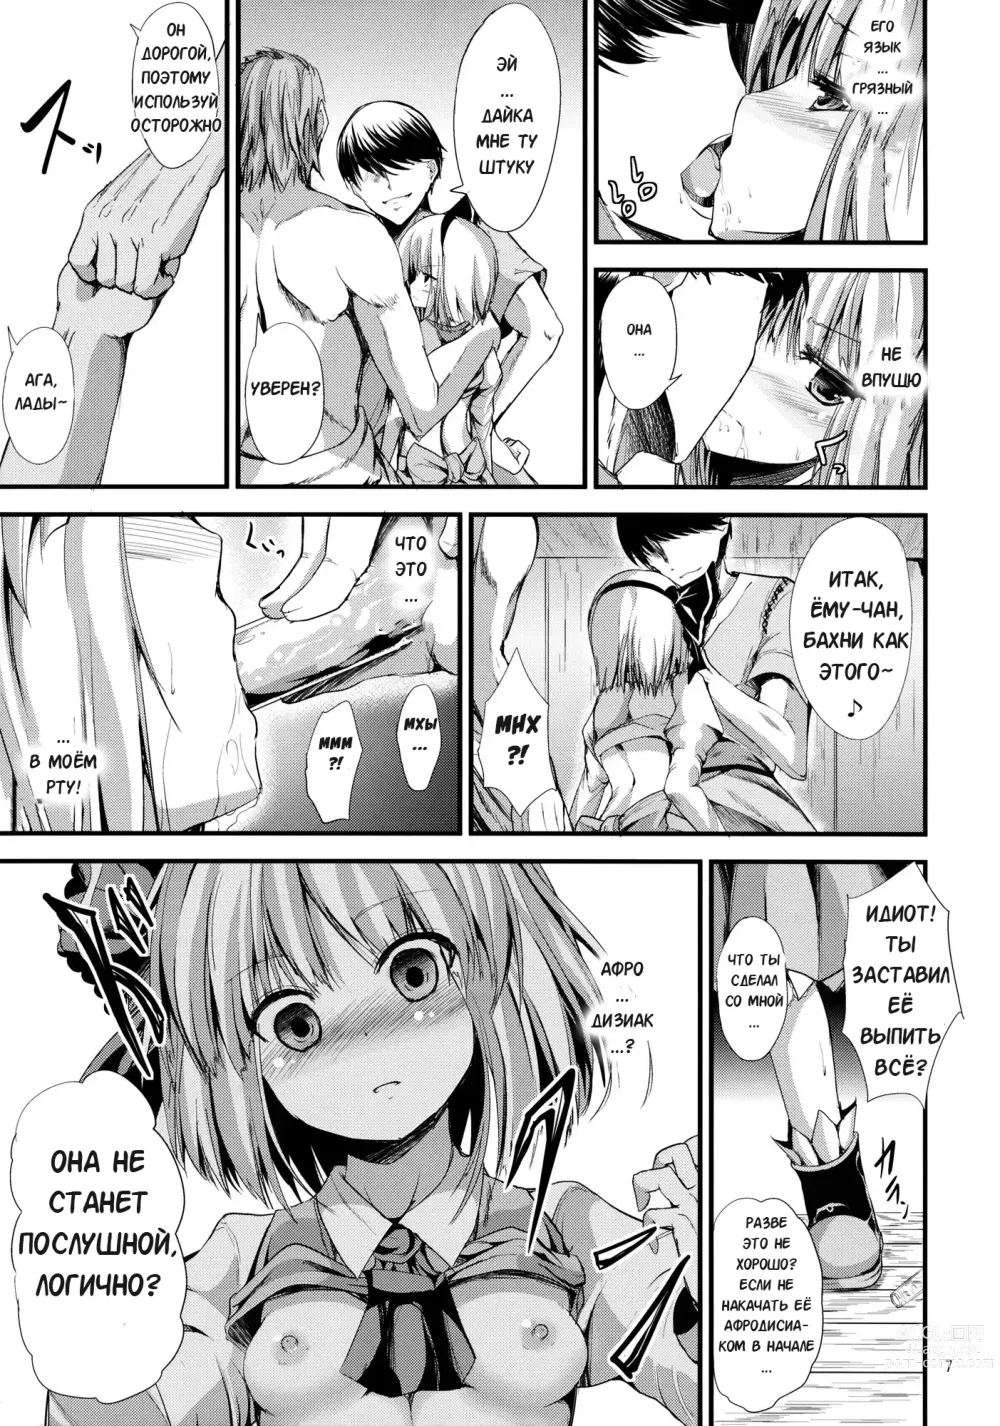 Page 6 of doujinshi ВОСХОД